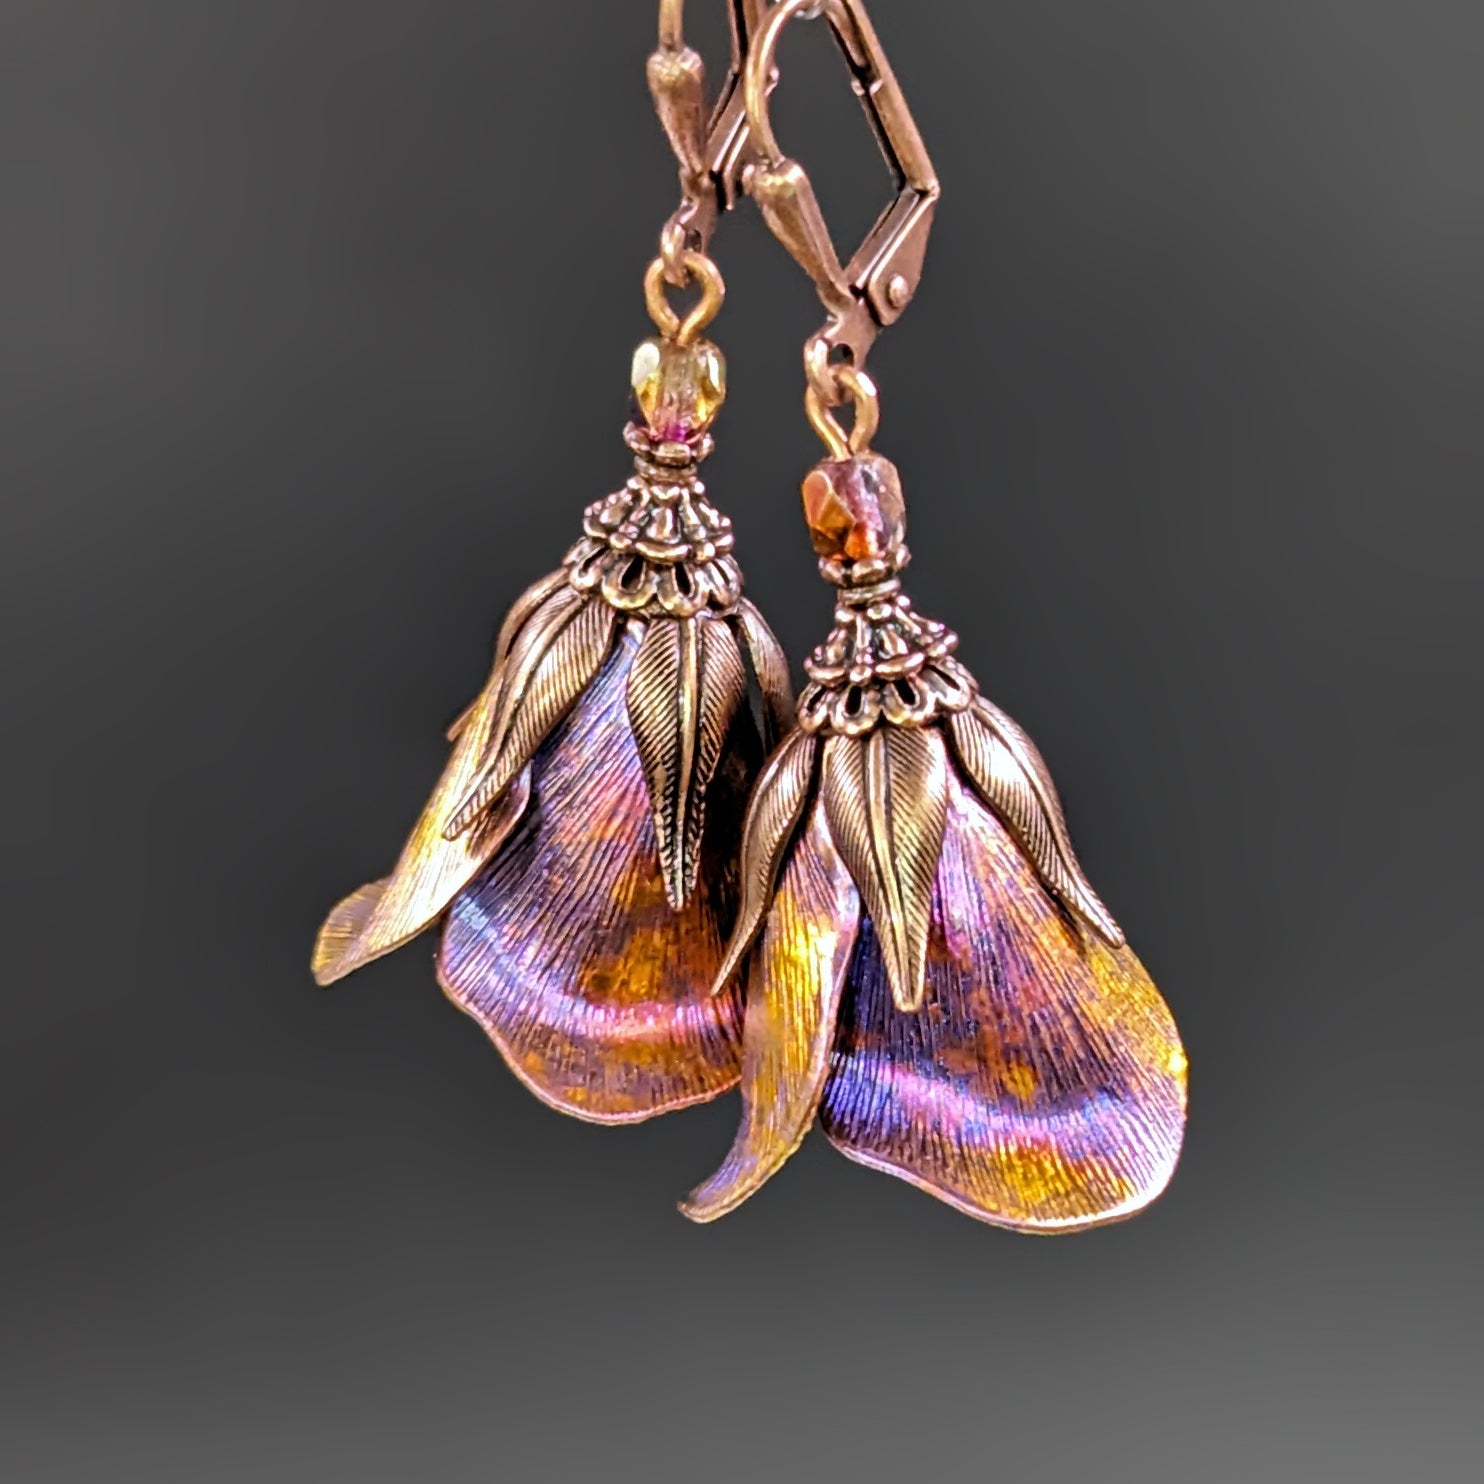 Iridescent Flower Earrings in Pink, Orange, Yellow, and blue with Antiqued Copper metal. The flower earrings are photographed on a black background.